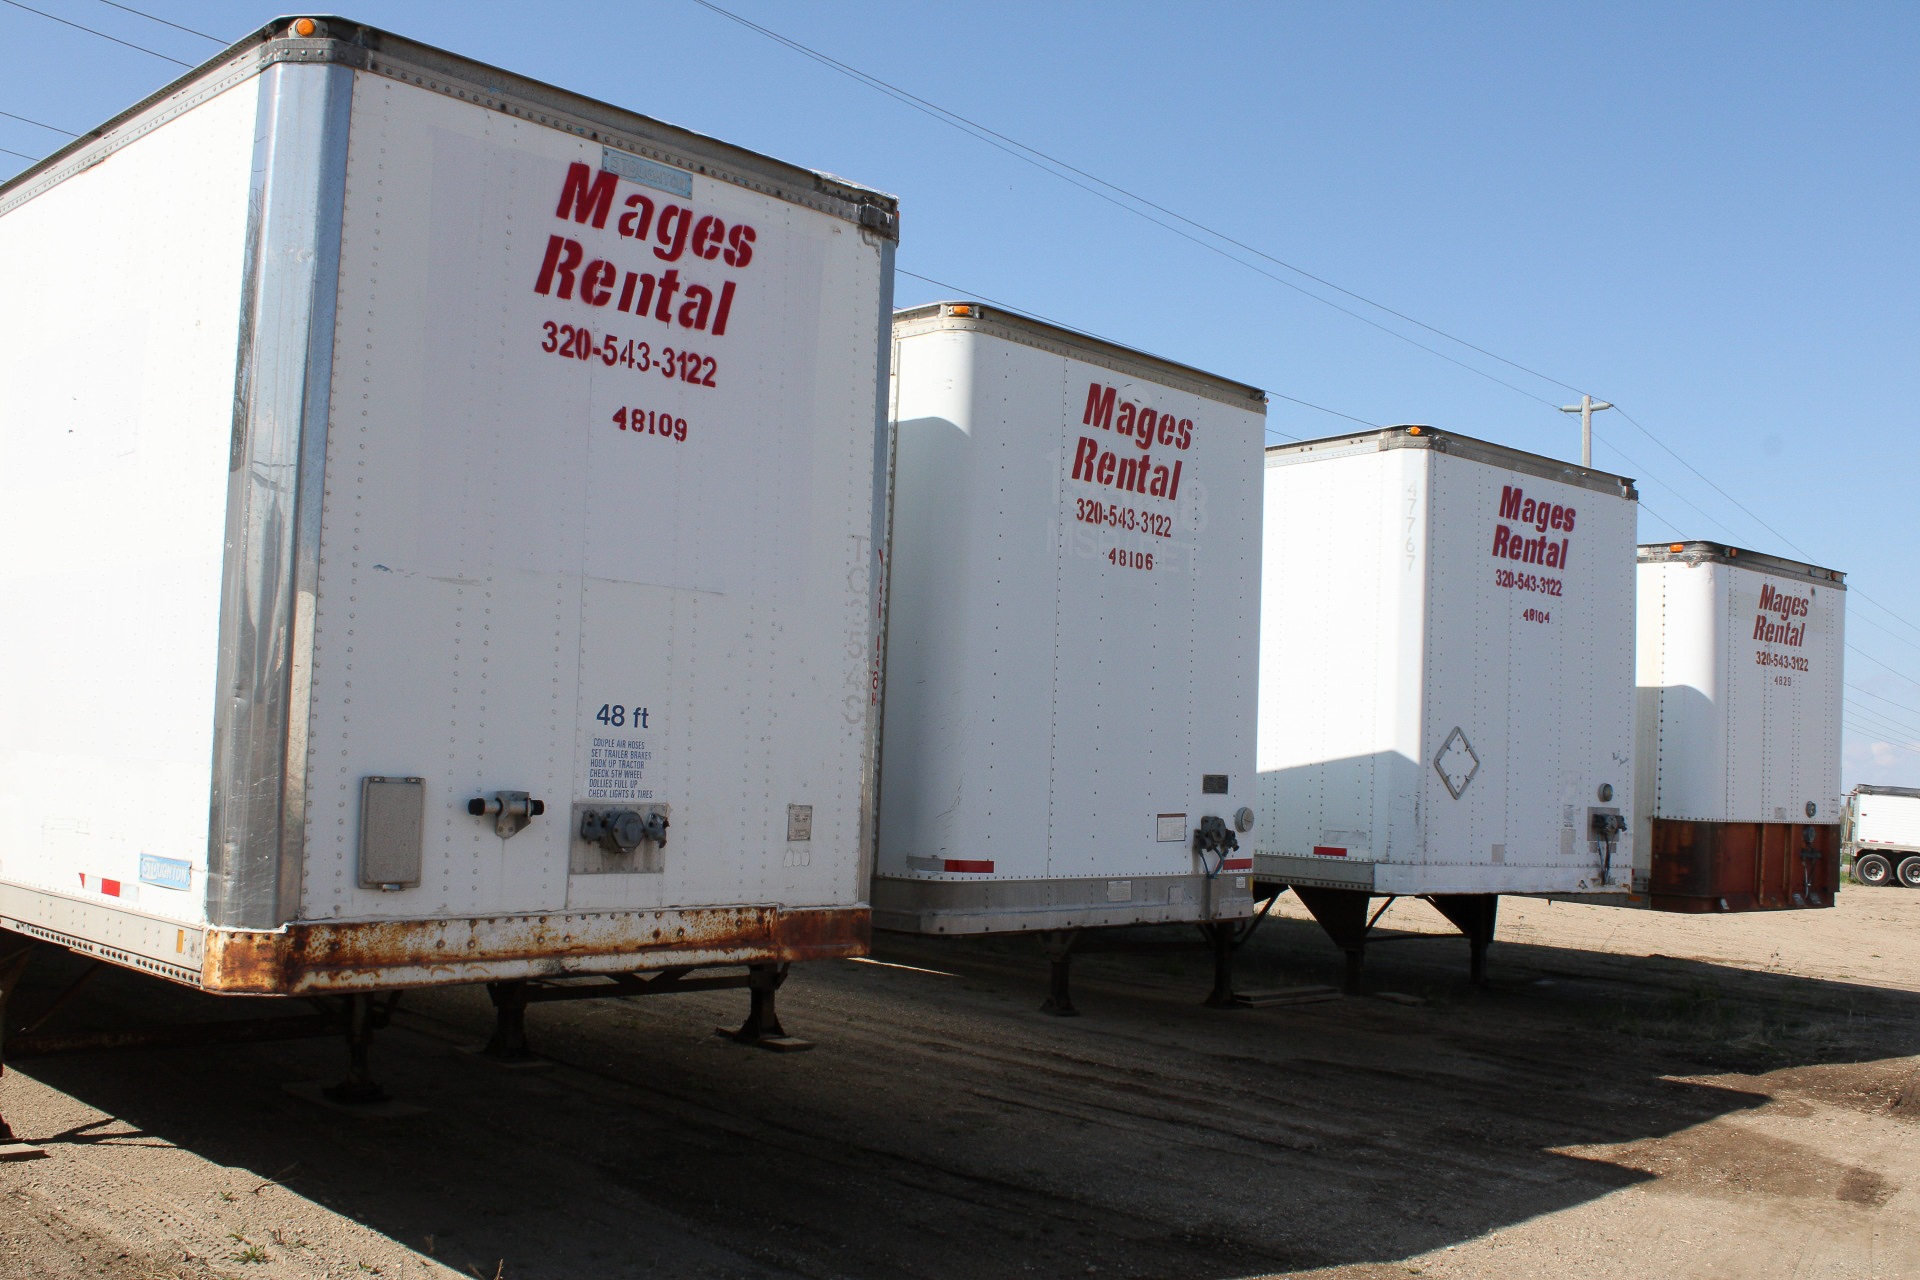 image of the mages rental trailers